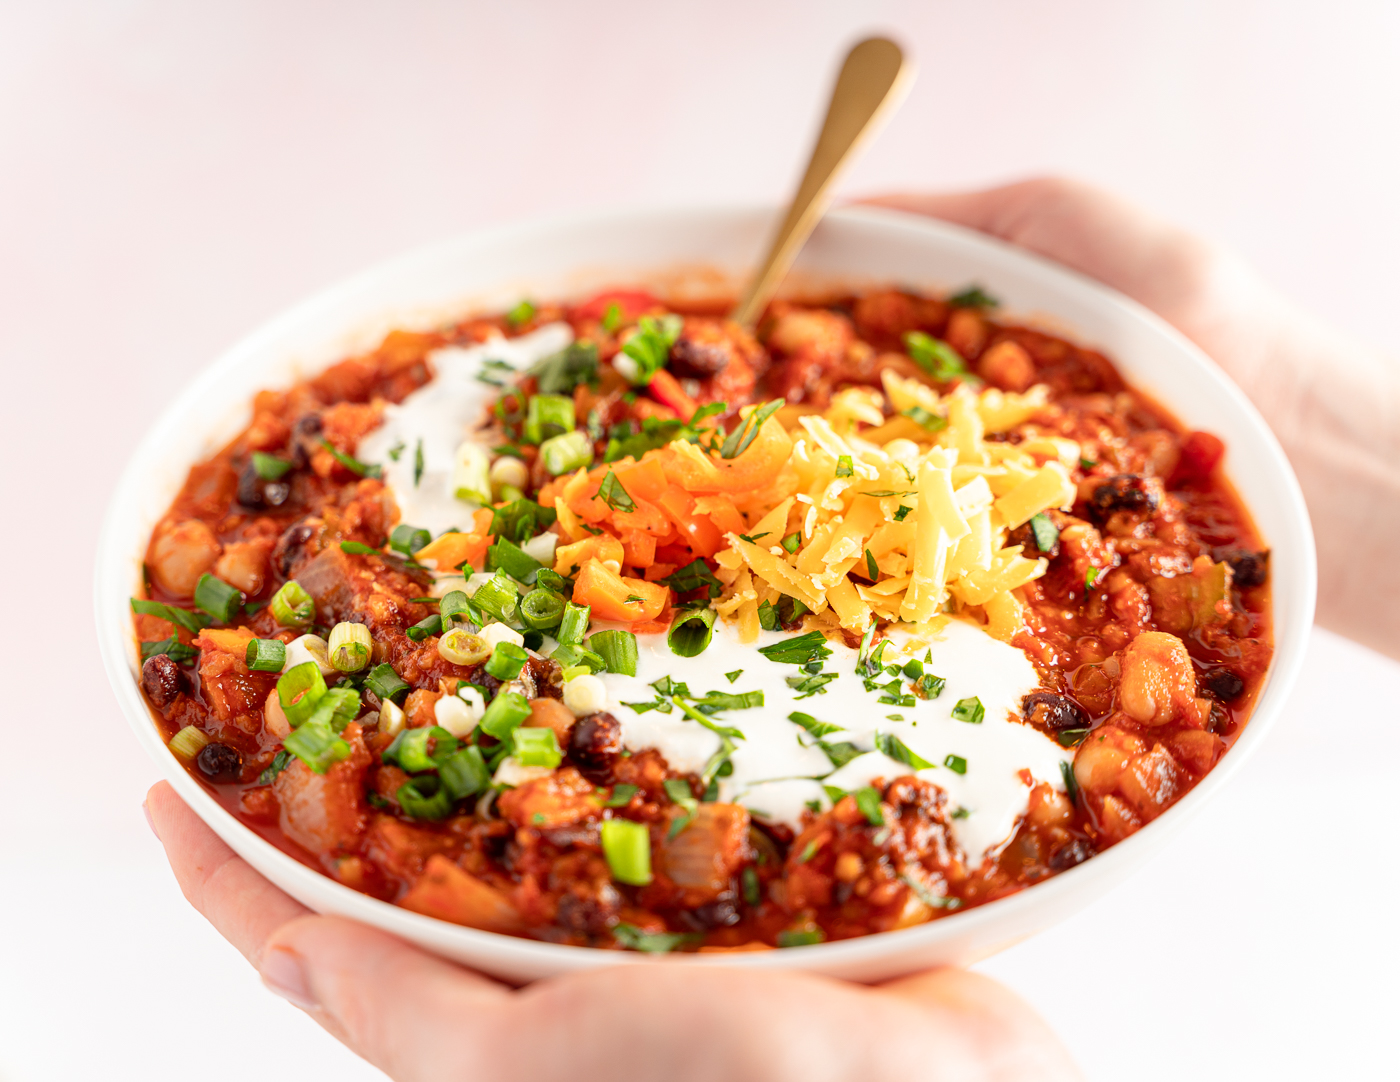 A bowl of Vegetable chili enclosed by hands. The chili is garnished with green onion, cheddar cheese, diced orange bell pepper, and creamy sour cream.